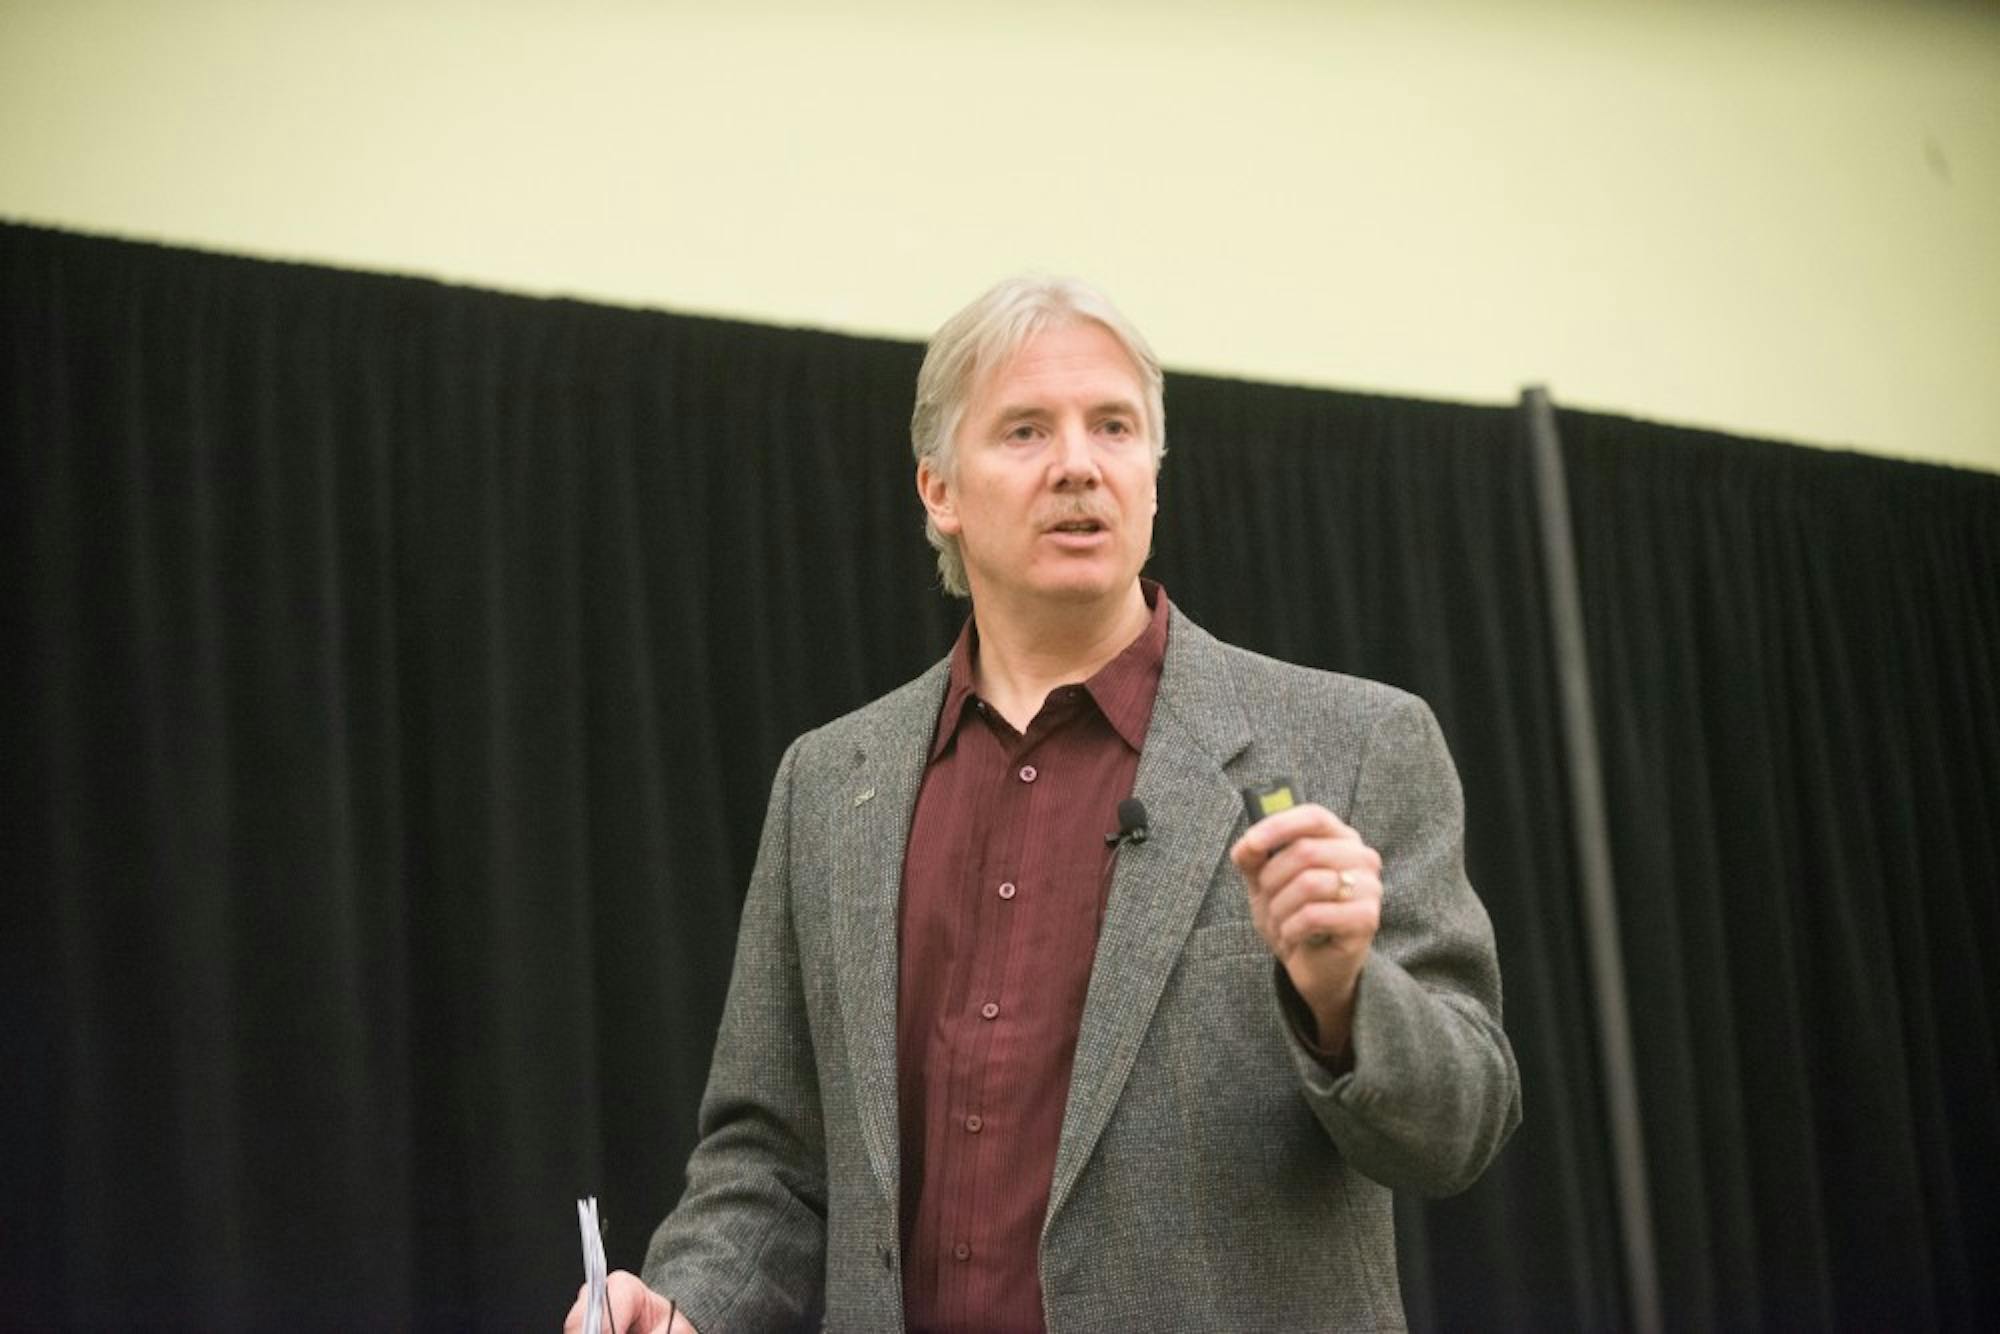 	Marty Raymond, a professor at the School of Nursing at Eastern Michigan University, discussed the connection between poverty and health on Tuesday for the Honors College’s star lecture series on poverty.